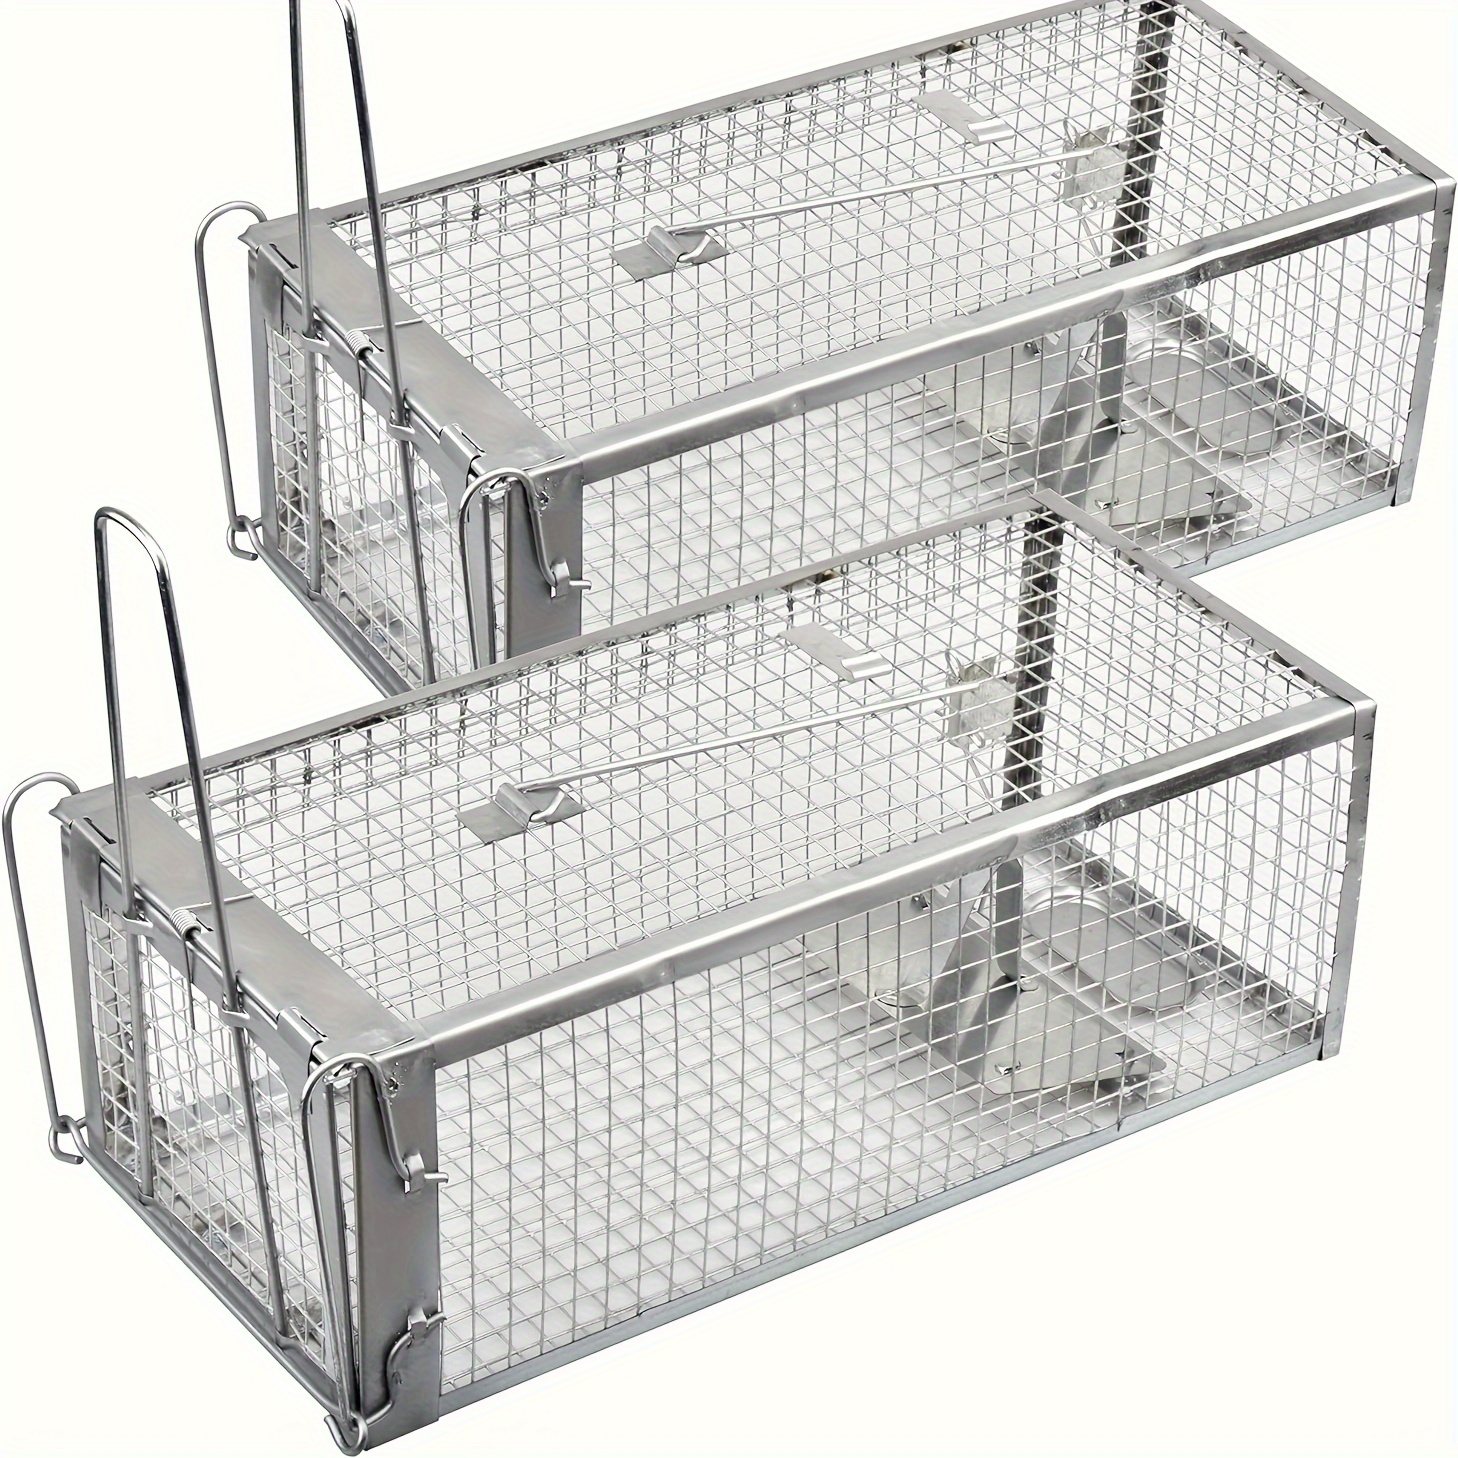 

1pc, Heavy-duty Metal Rat Trap Cage, 10.63in X 5.5in X 4.72in, Reusable Rodent Catcher With Auto Door Lock Bait Plate For Indoor Home Pest Control